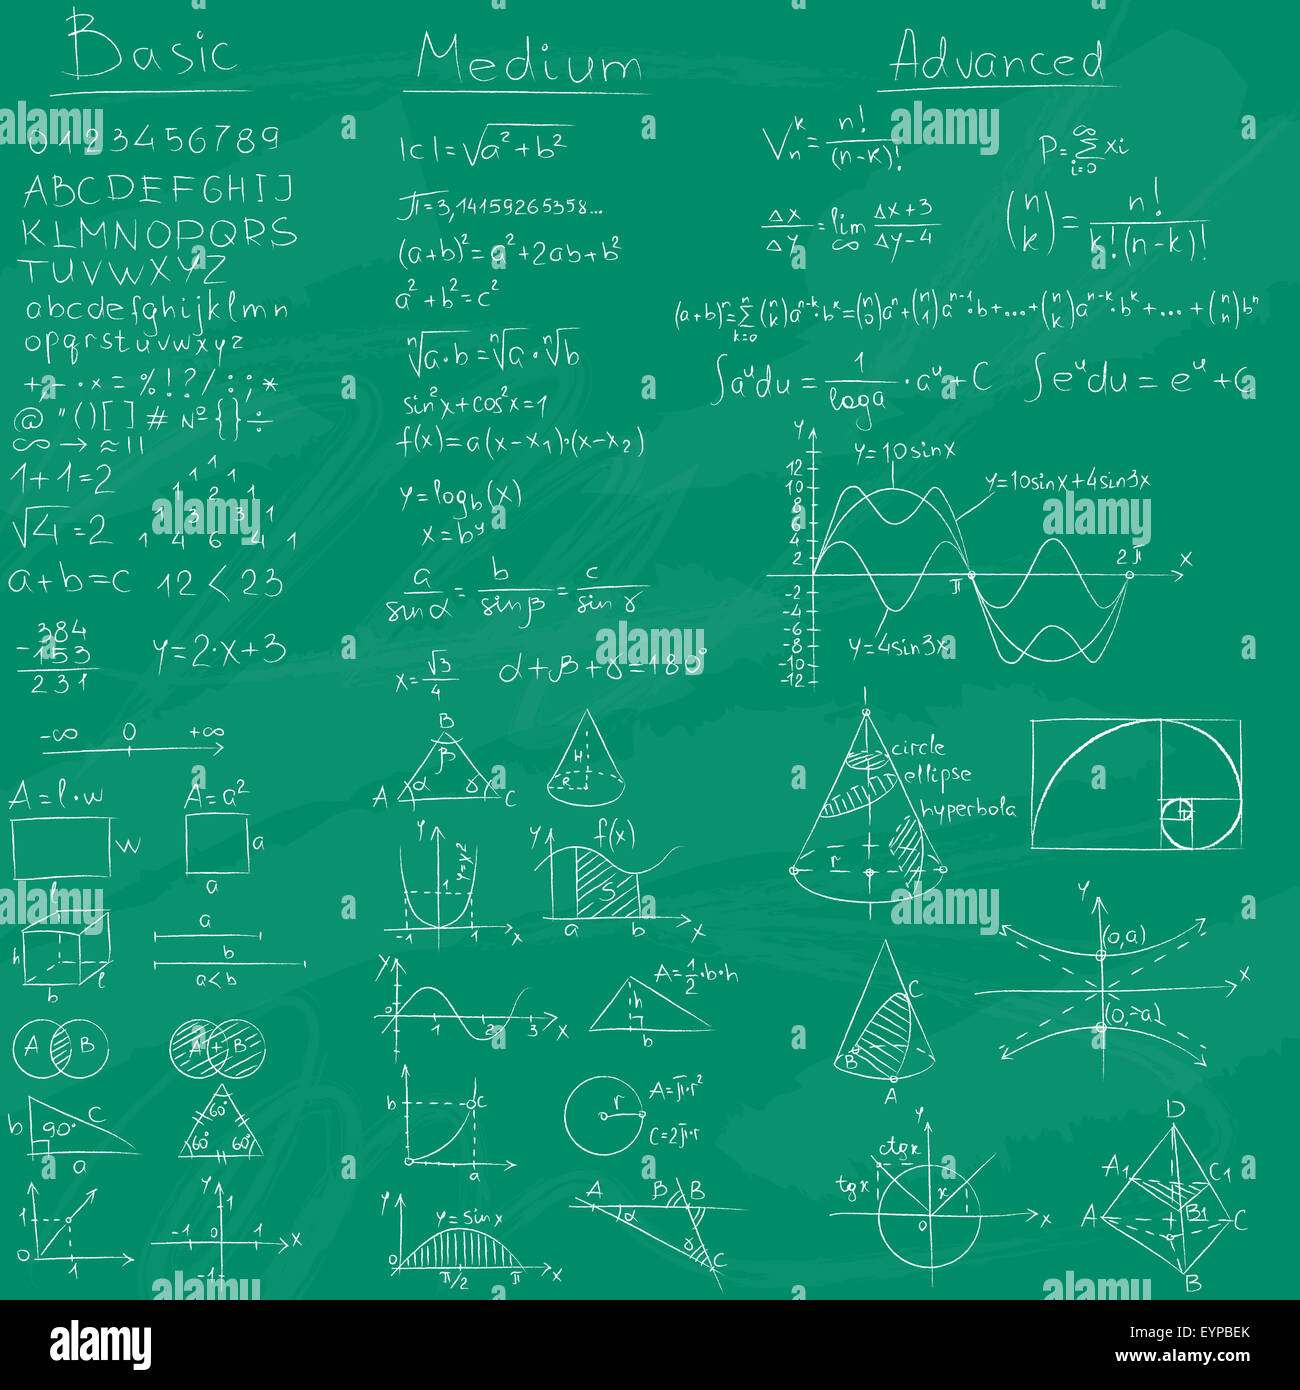 Vector of Mathematics on green chalkboard. 3 different levels, basic, medium and advanced. Stock Photo